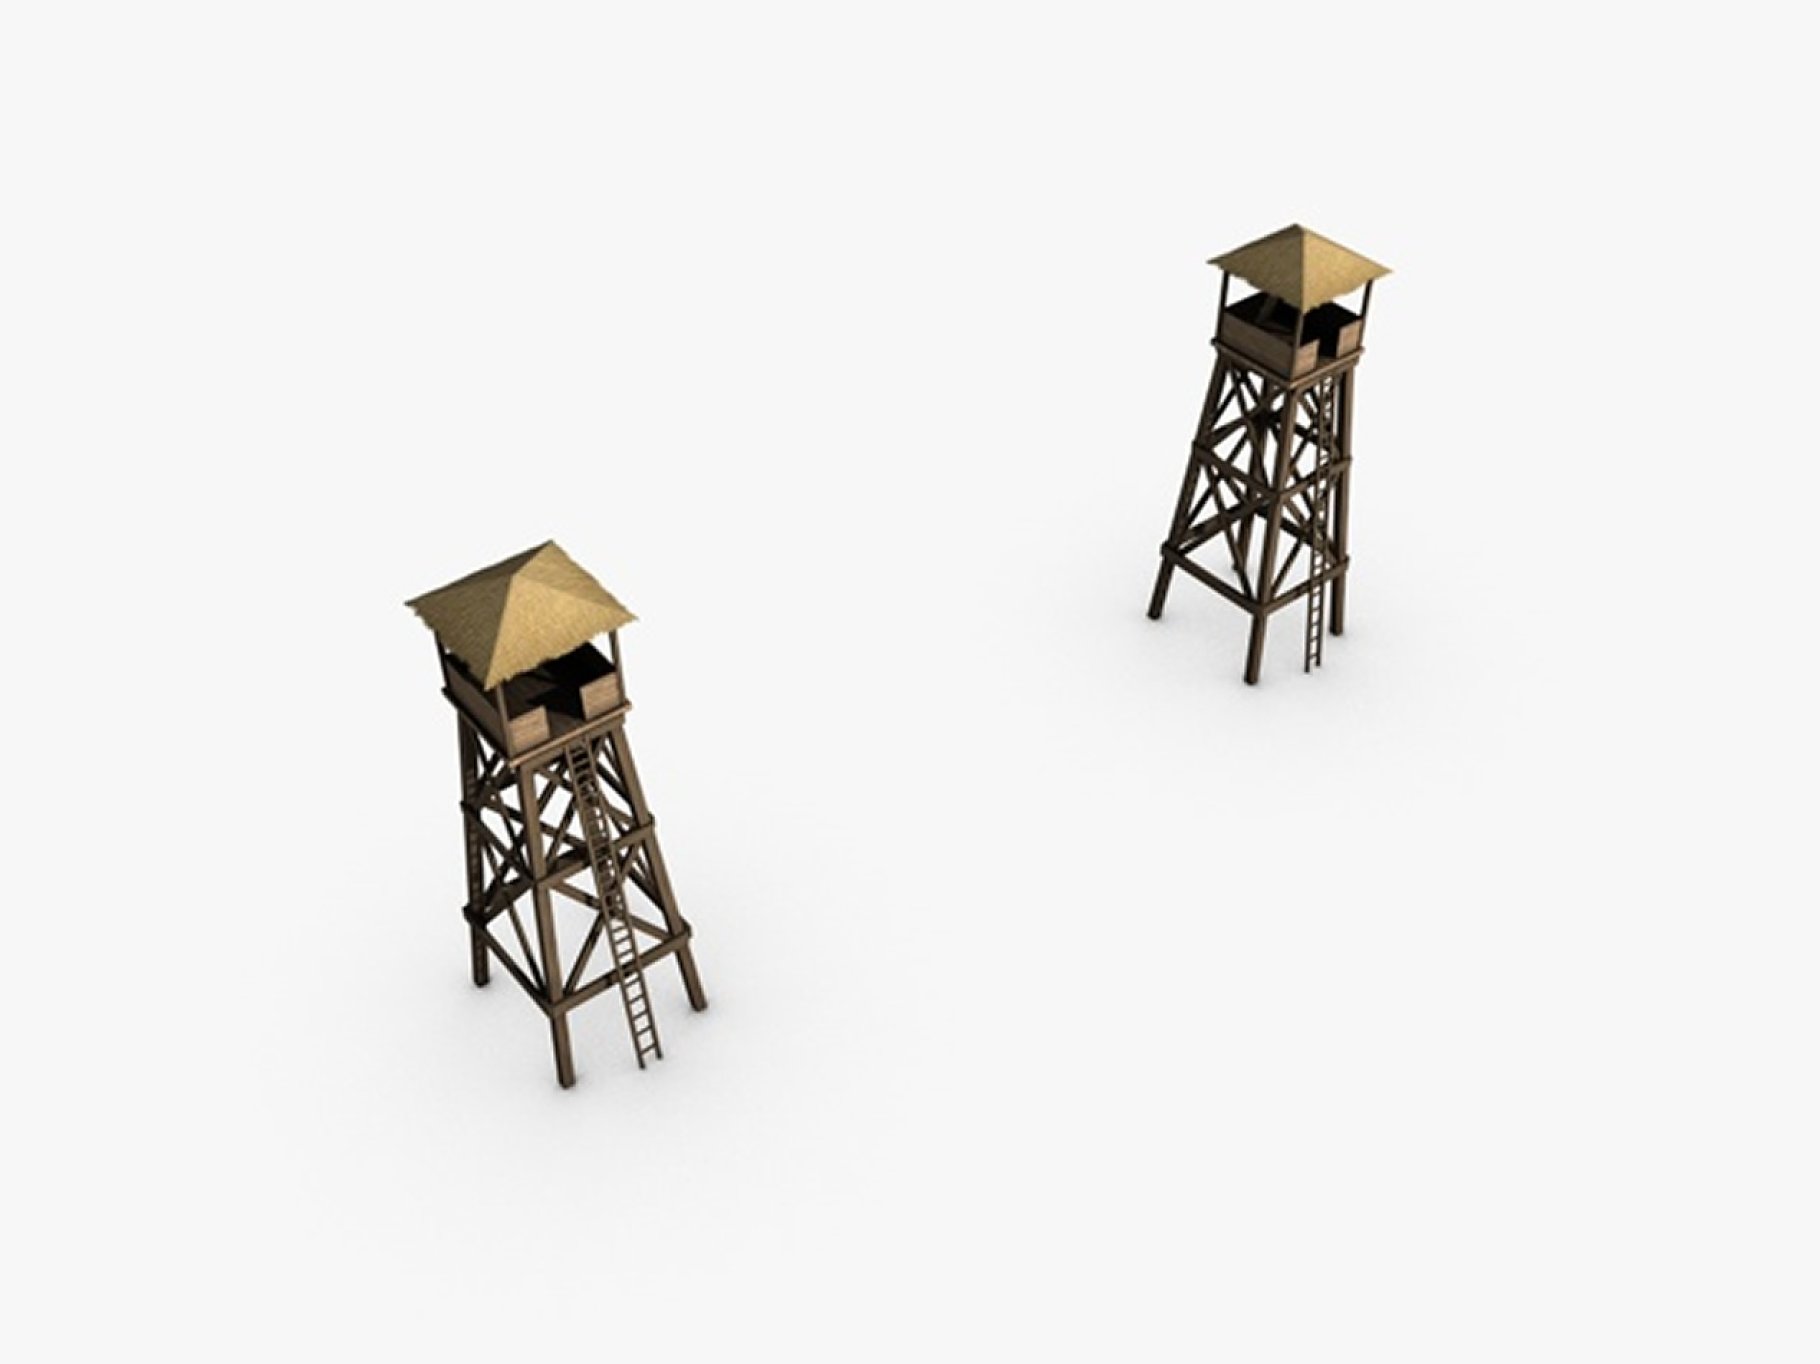 2 brown low poly watchtower mockups.